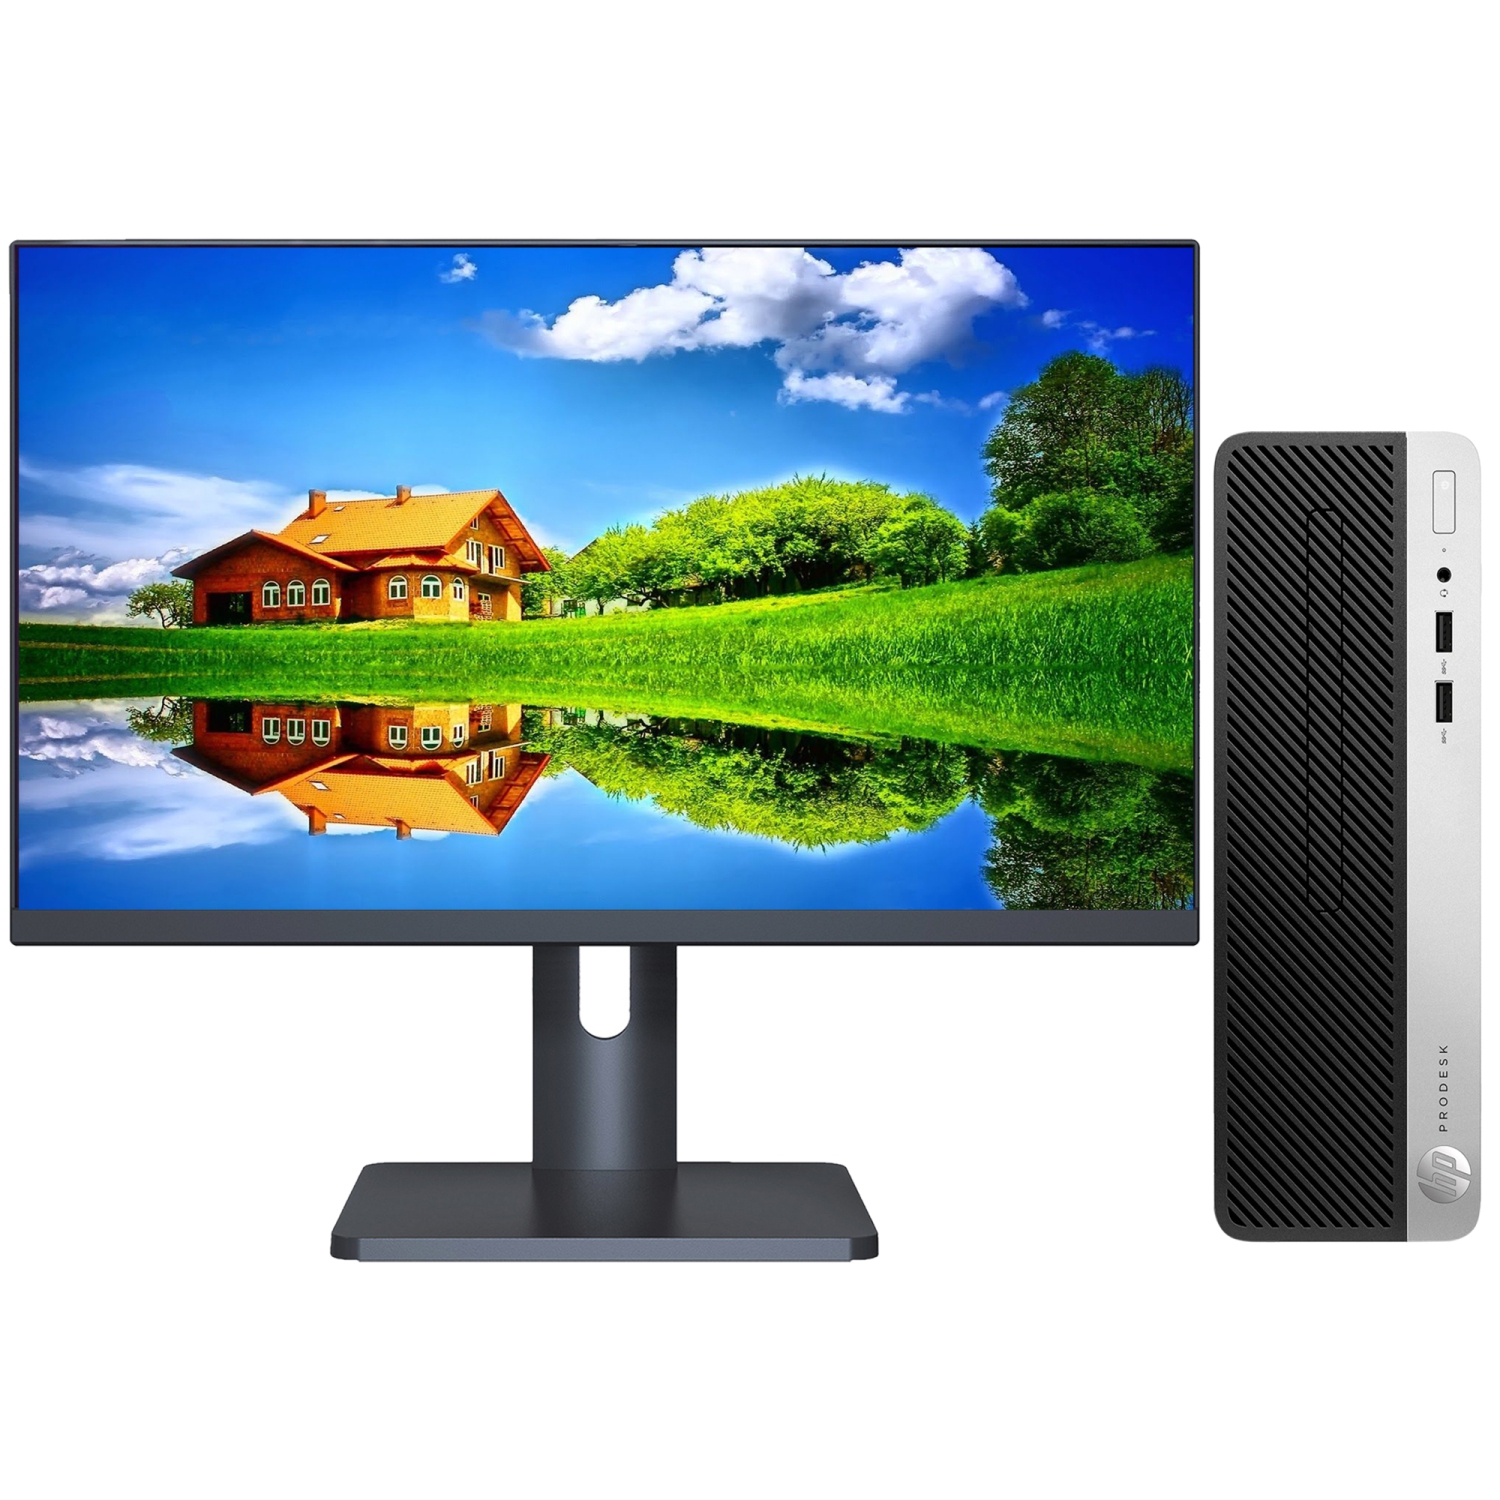 Refurbished (Good) - HP ProDesk 400 G4 SFF Business Desktop PC Computer, New 27" FHD Monitor, Intel Core i5-7500 7th GEN up to 3.80 GHz, 8GB DDR4 RAM, 256GB SSD, Windows 10 Pro